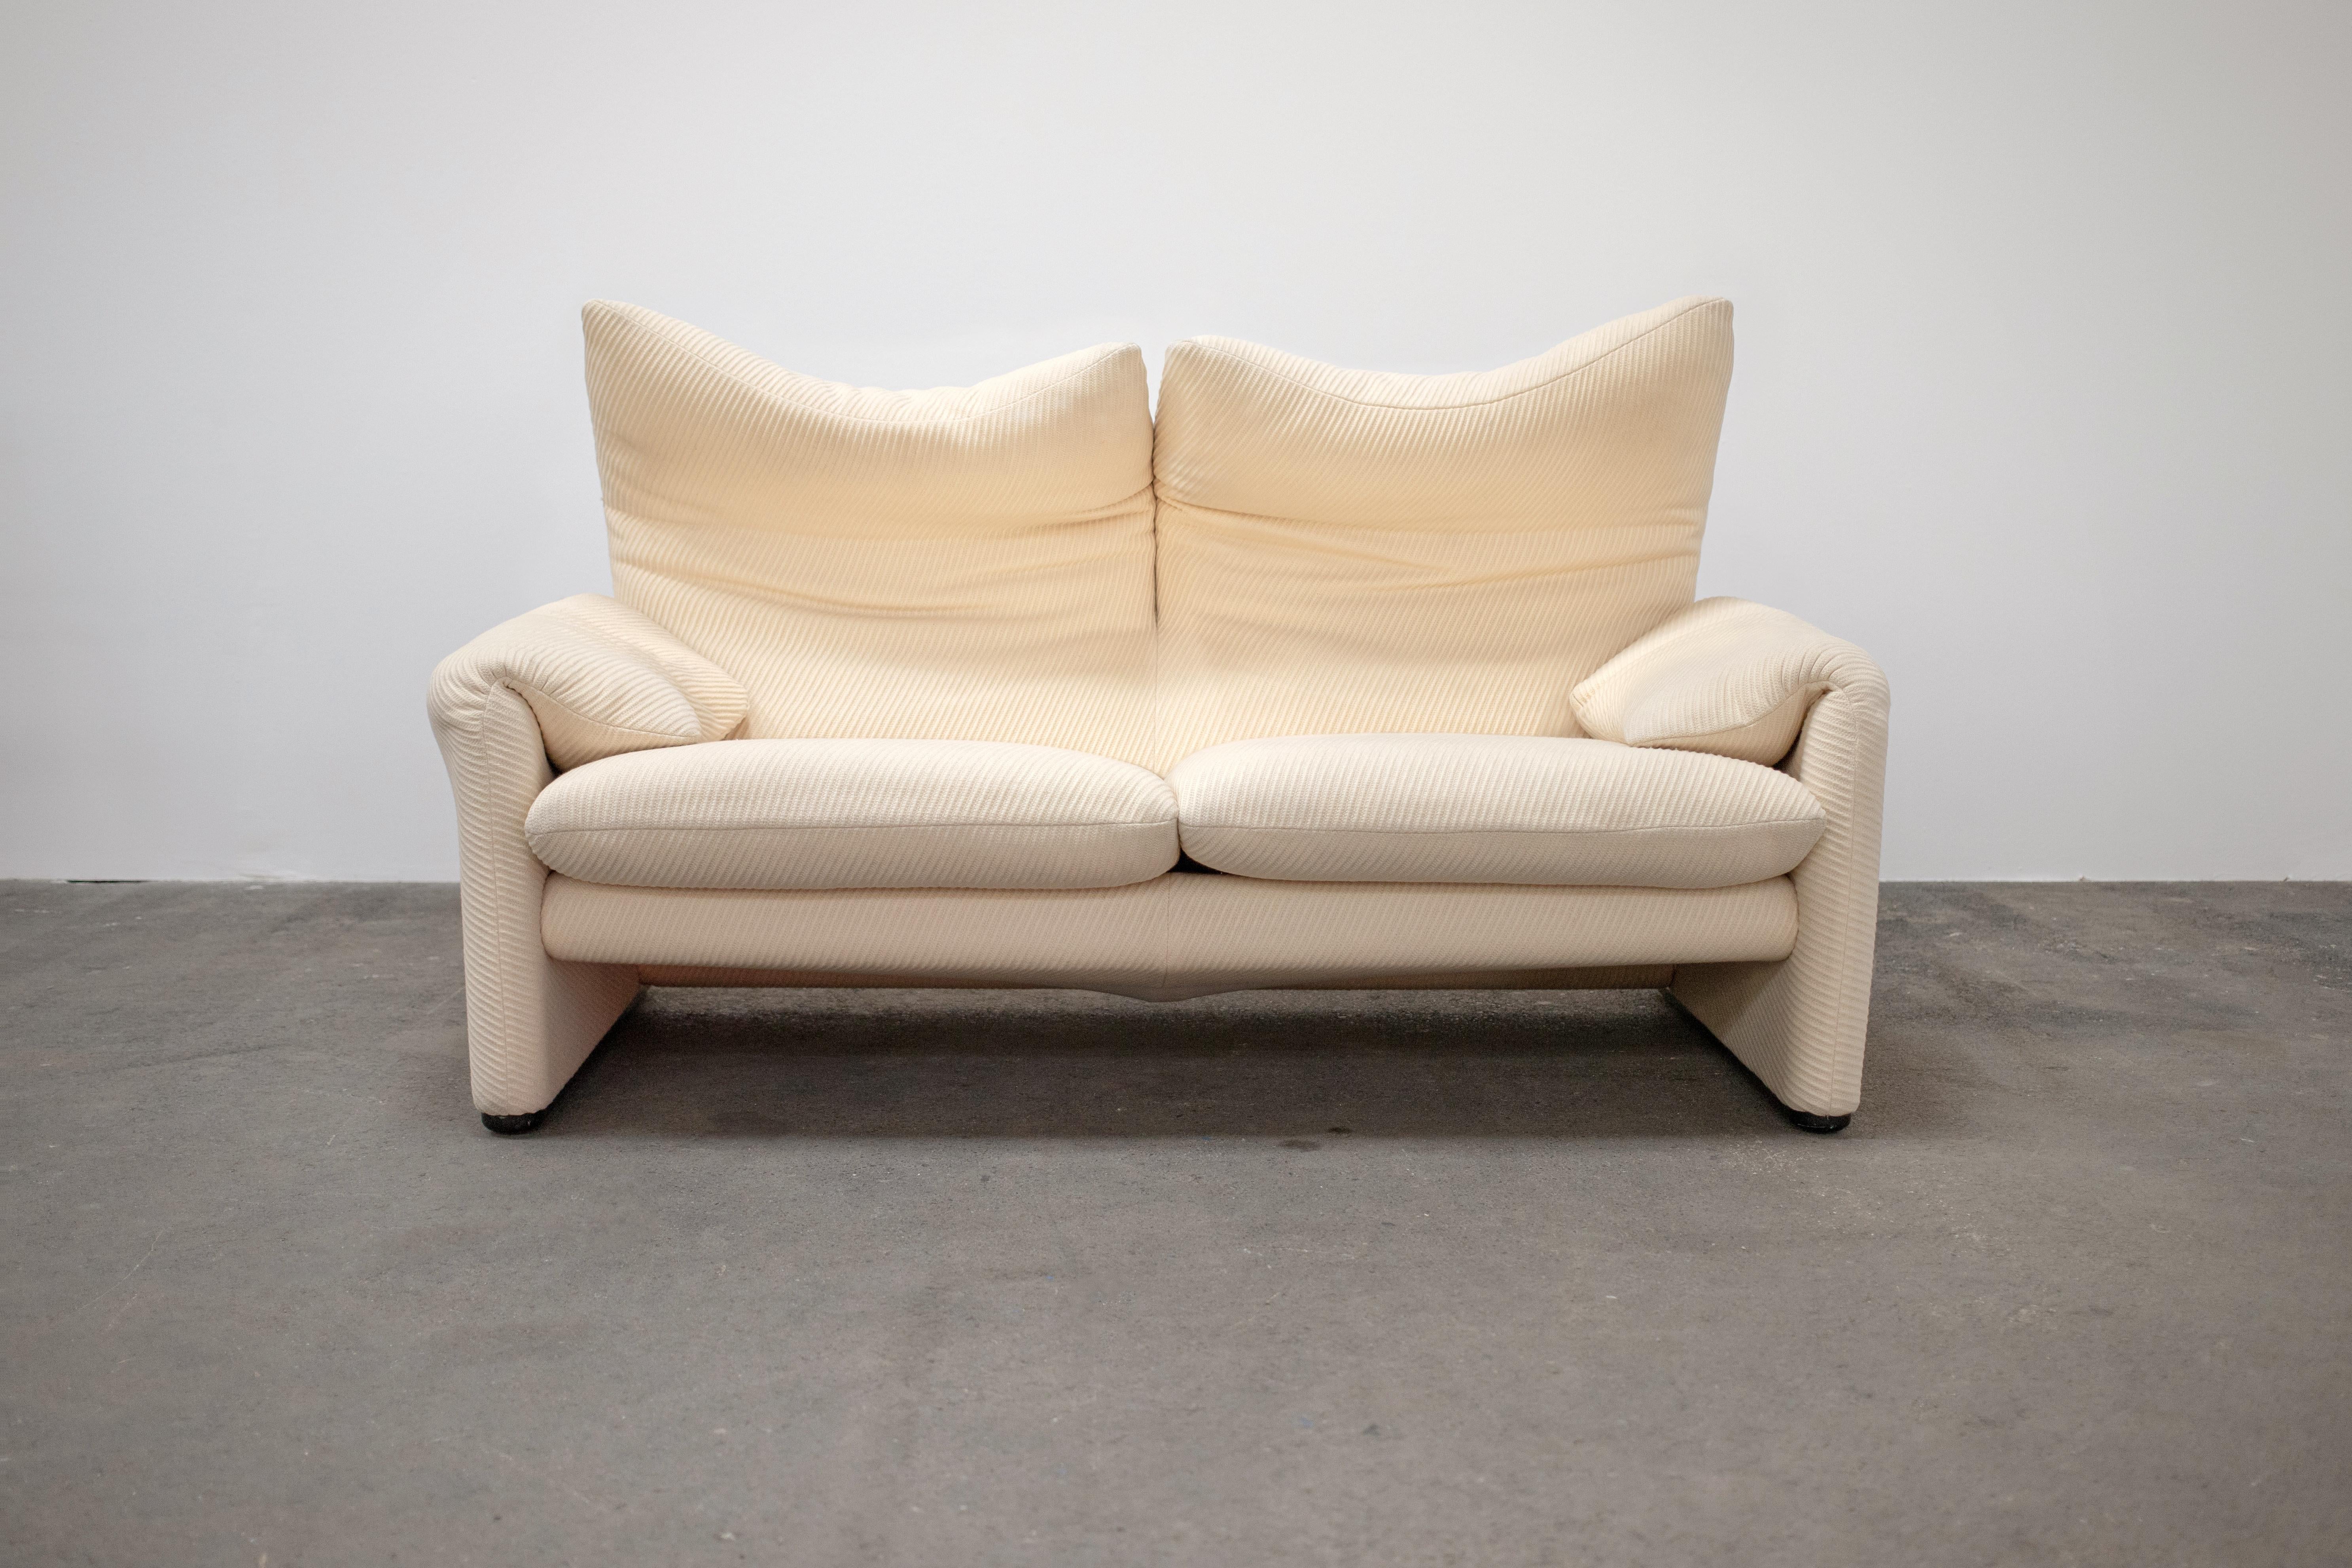 1970s Pair of 2-Seater Maralunga Sofas by Vico Magistretti for Cassina 1